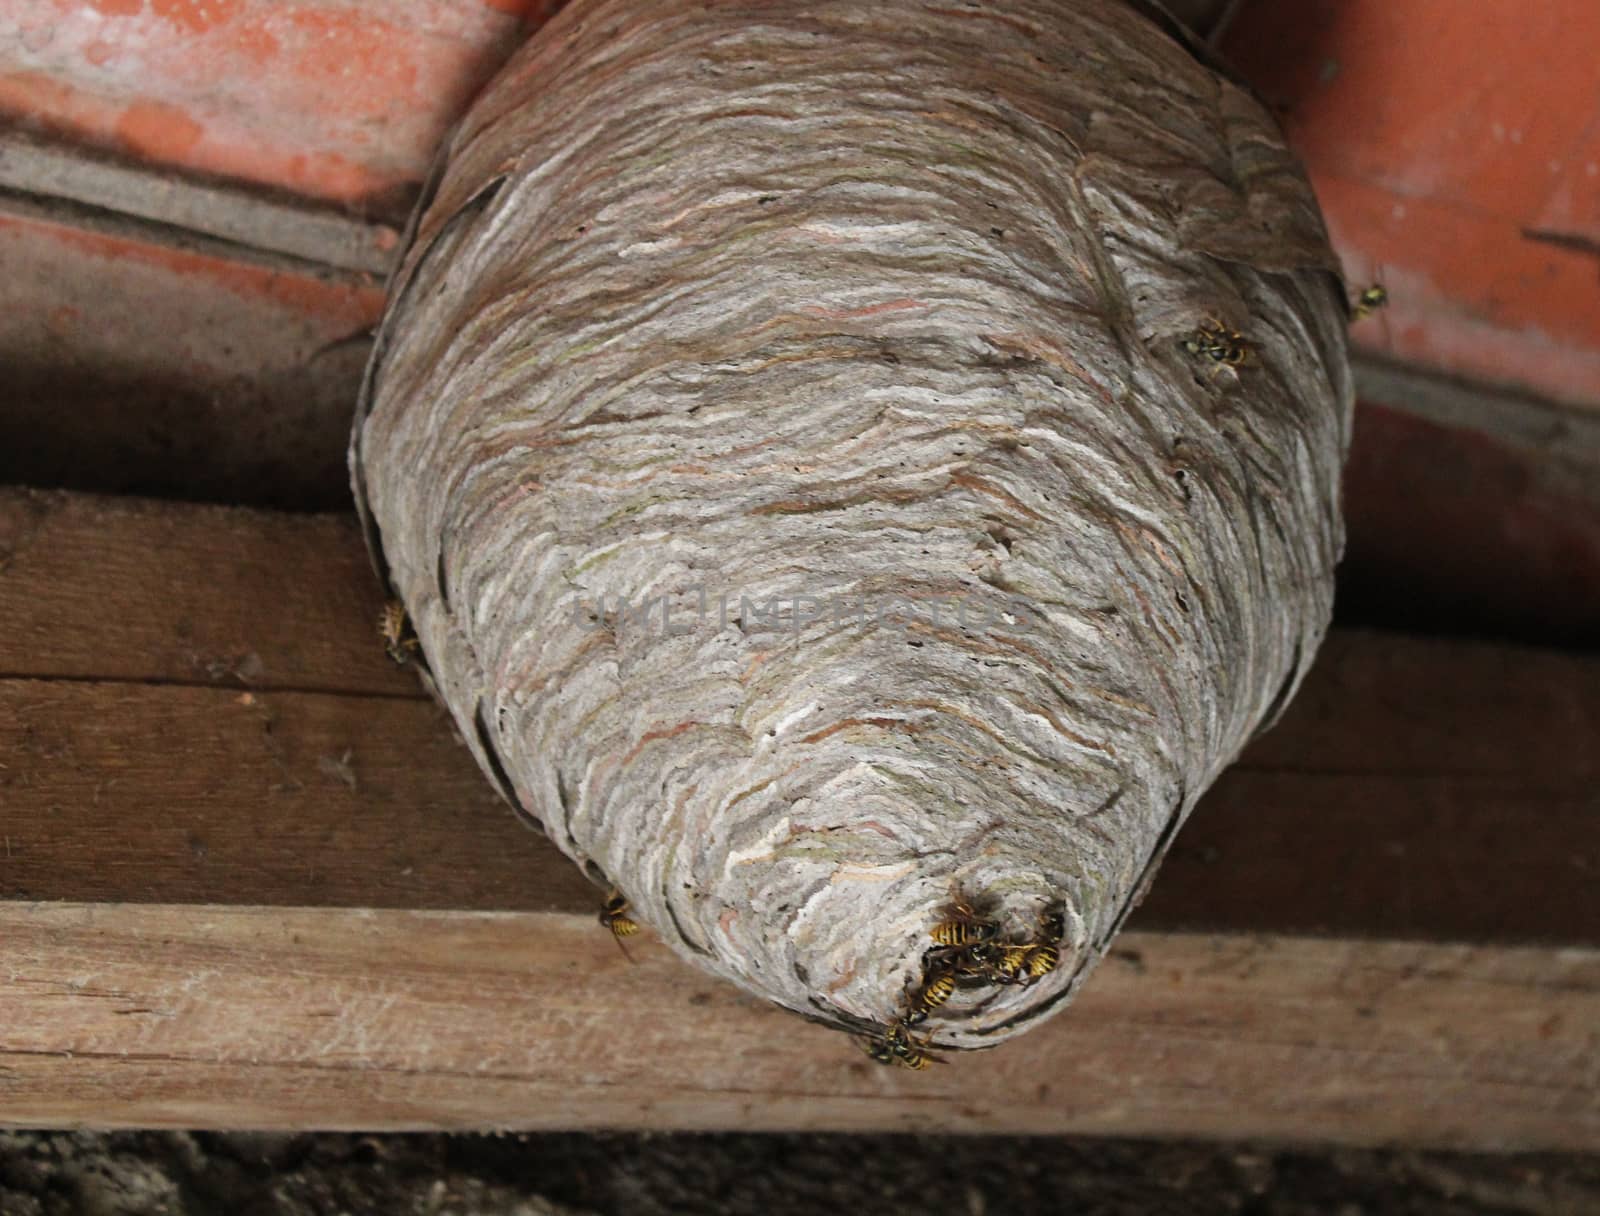 The picture shows wasps nest and wasps on the ceiling